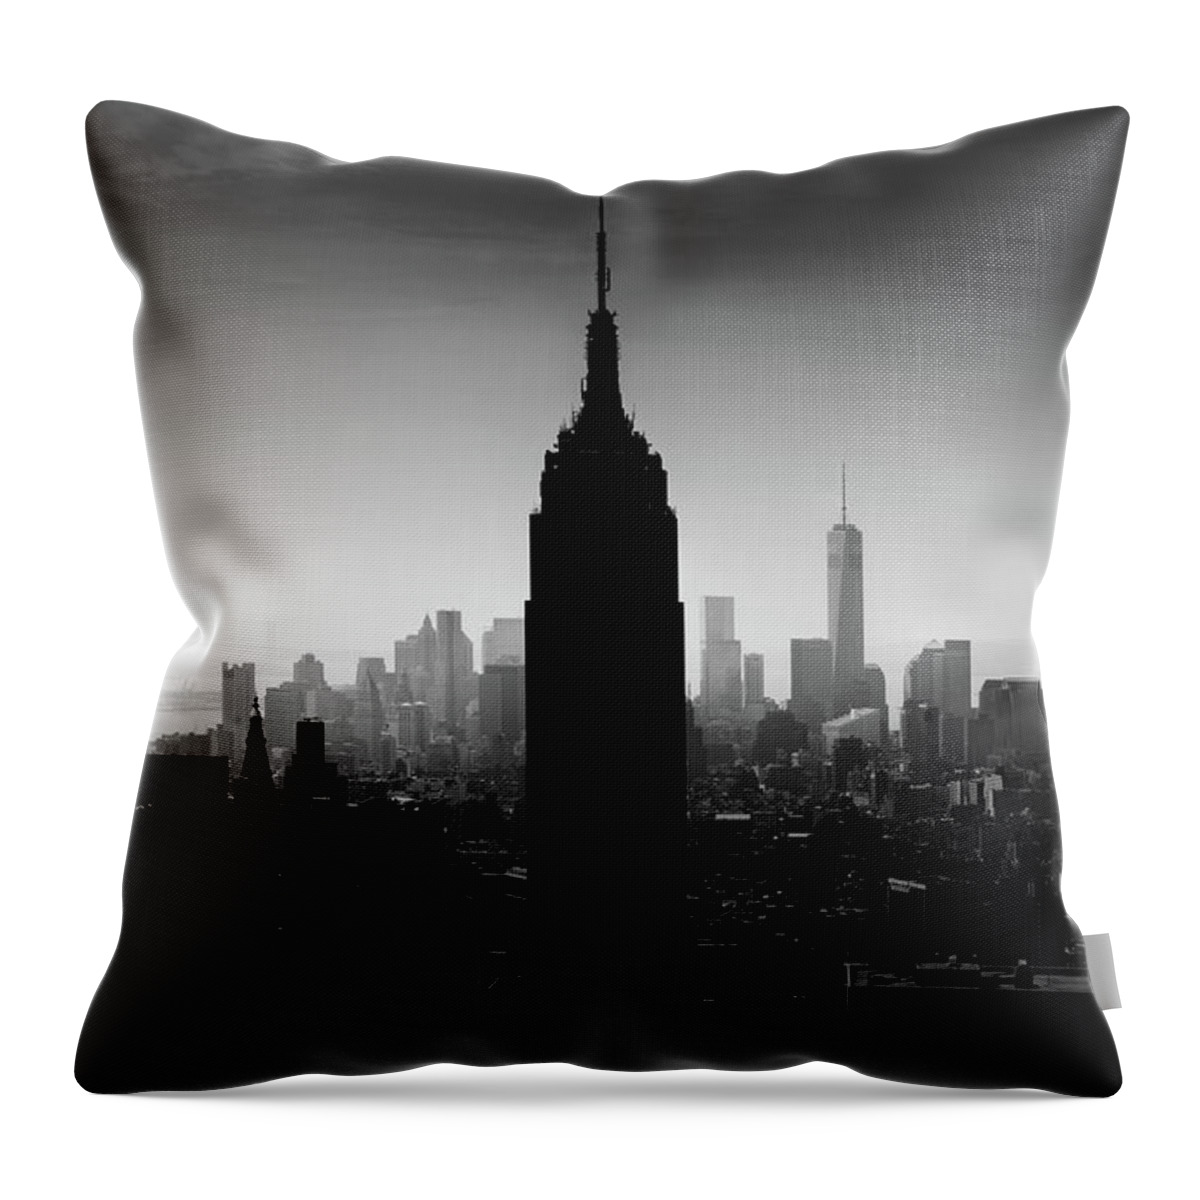 New York City Skyline At Night Throw Pillow featuring the photograph Kept In The Dark by Az Jackson